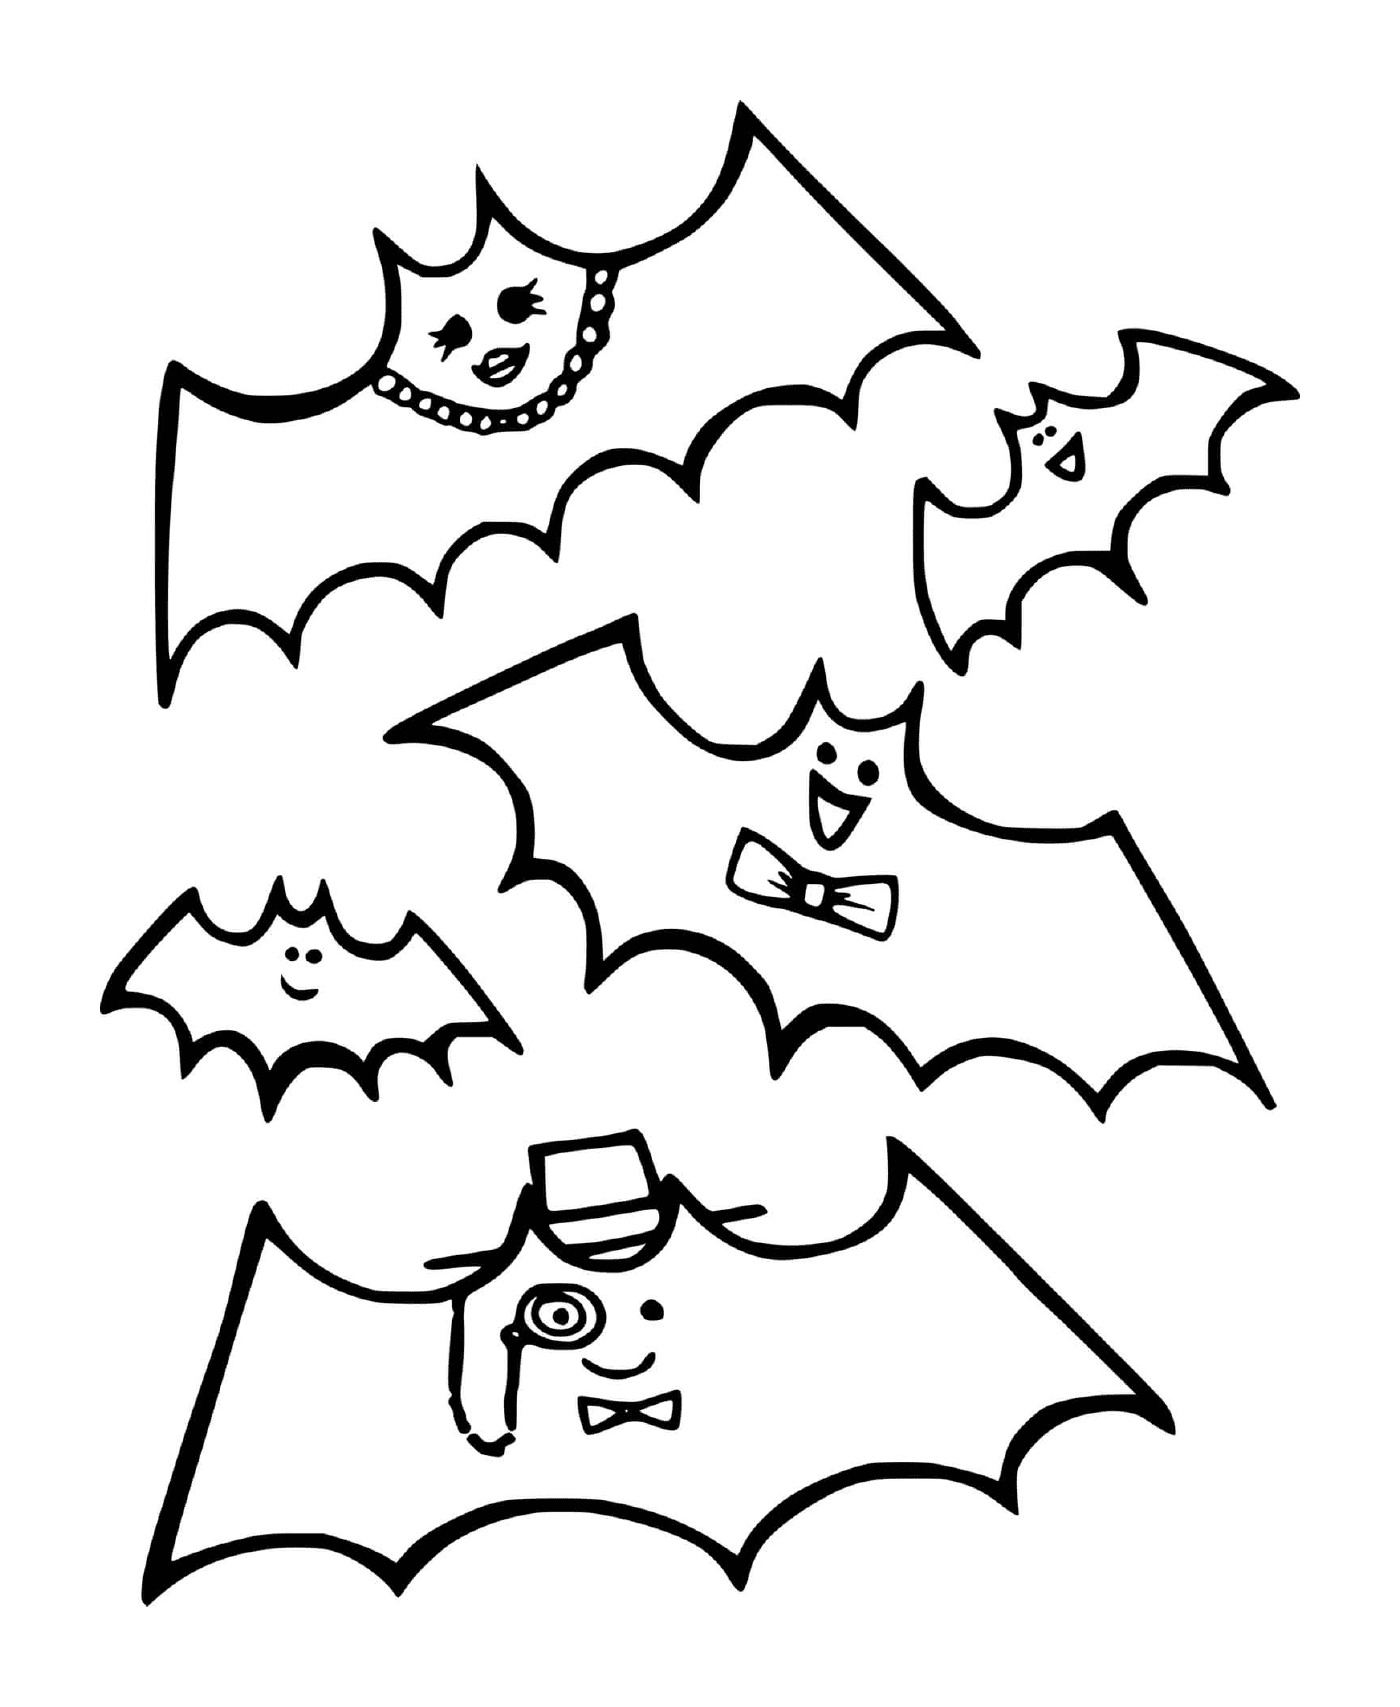  several bats with different decorations 